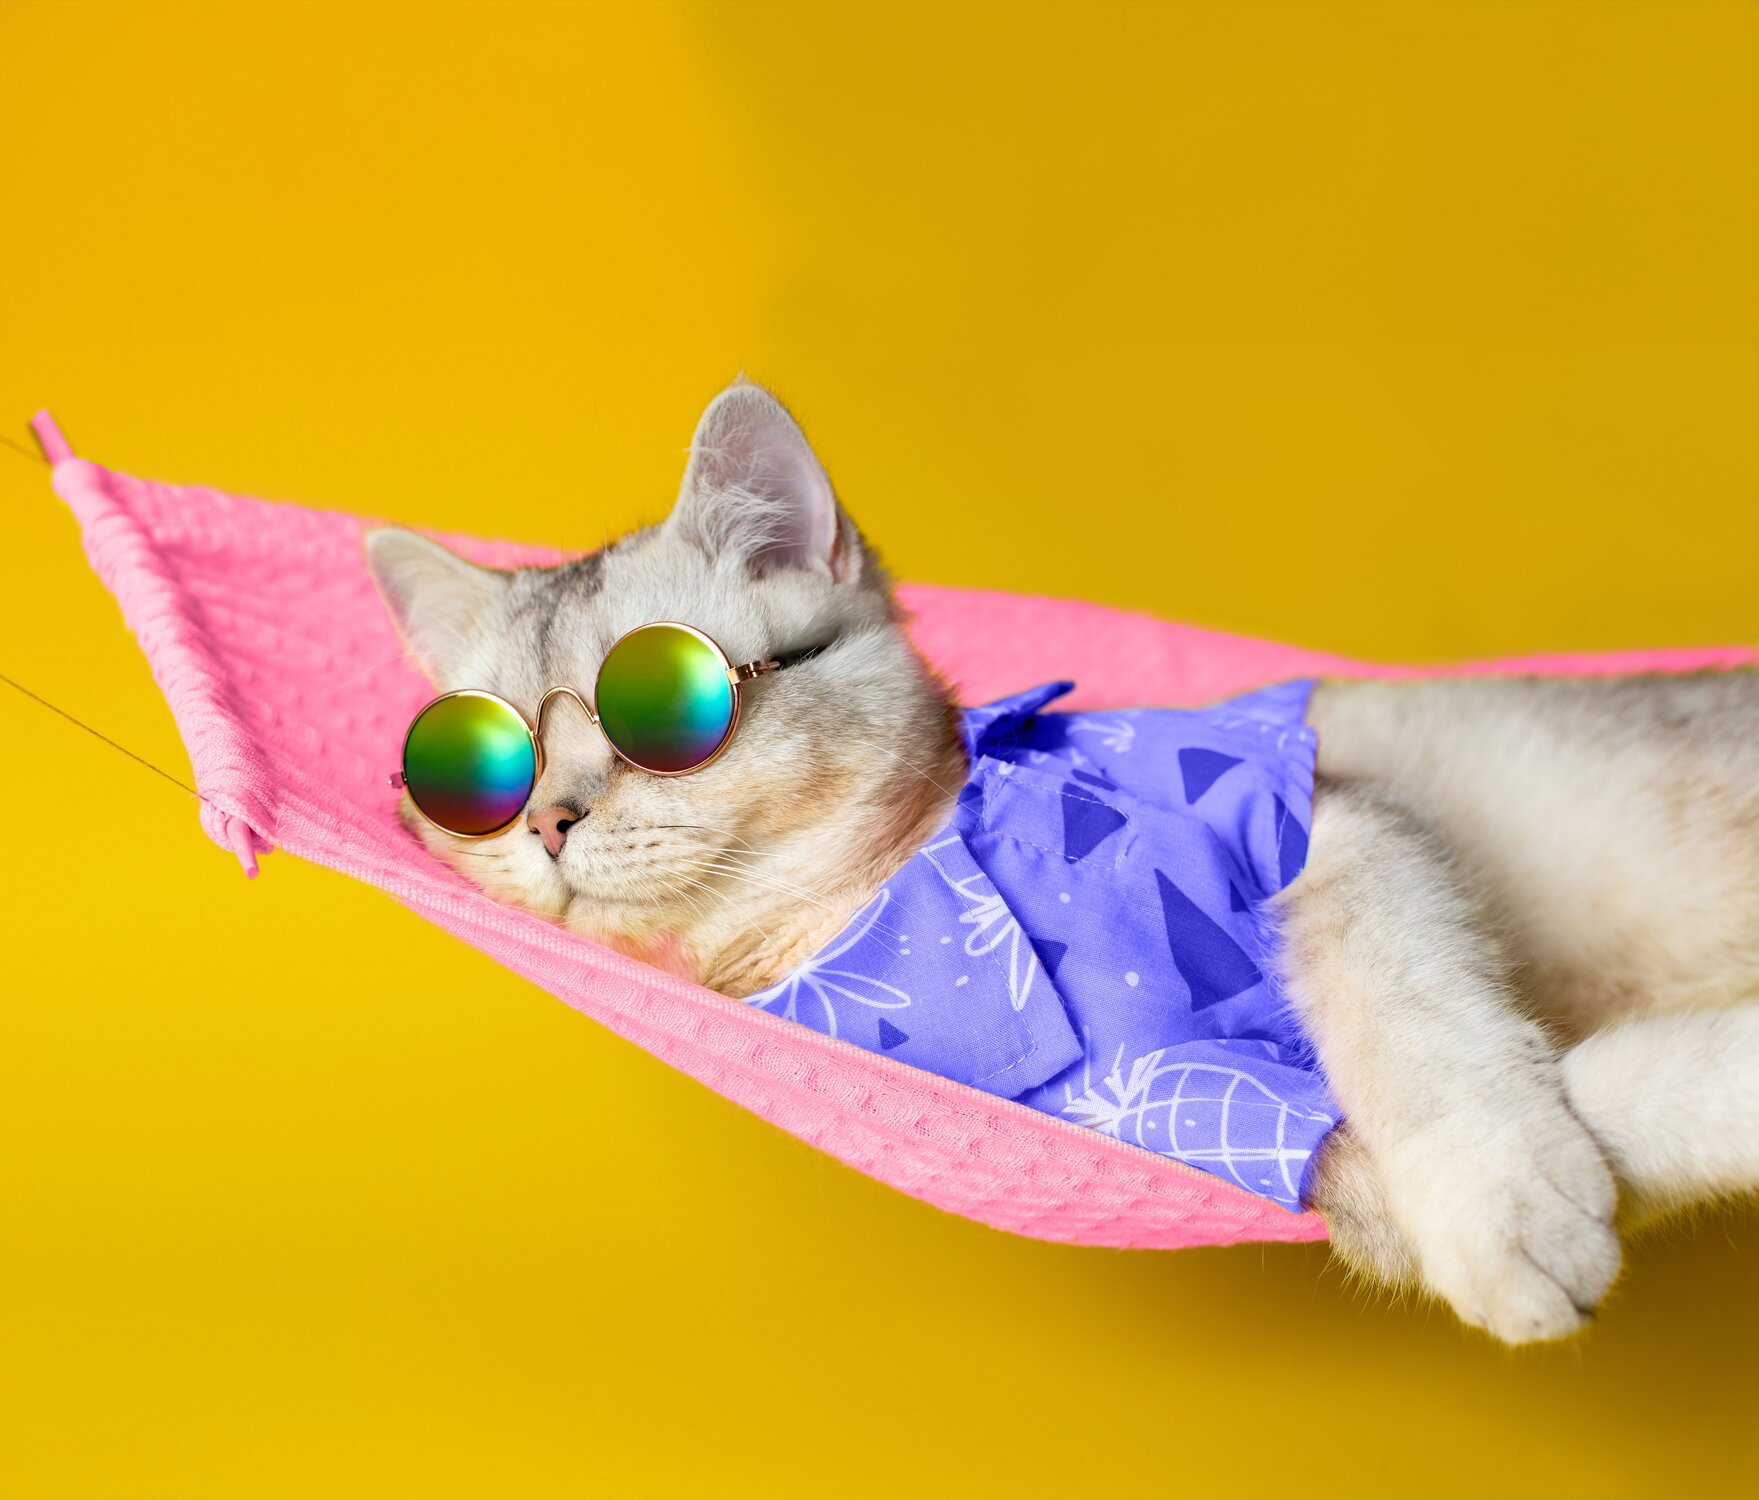 A cat wearing sunglasses and a purple Hawaiian shirt, relaxing on a pink hammock on a yellow background.